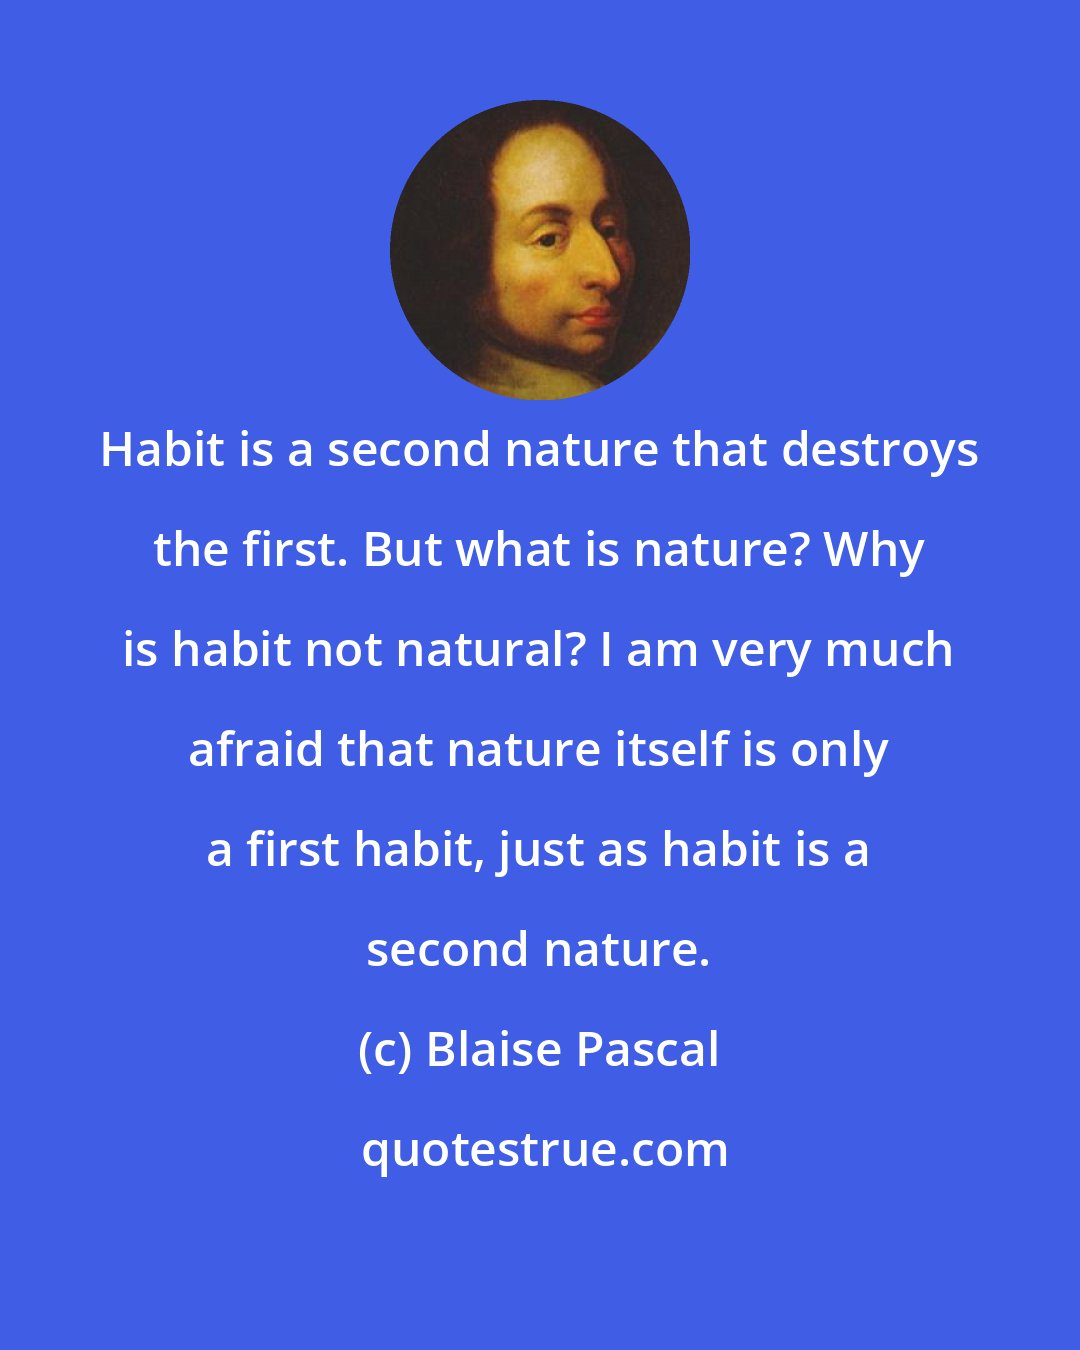 Blaise Pascal: Habit is a second nature that destroys the first. But what is nature? Why is habit not natural? I am very much afraid that nature itself is only a first habit, just as habit is a second nature.